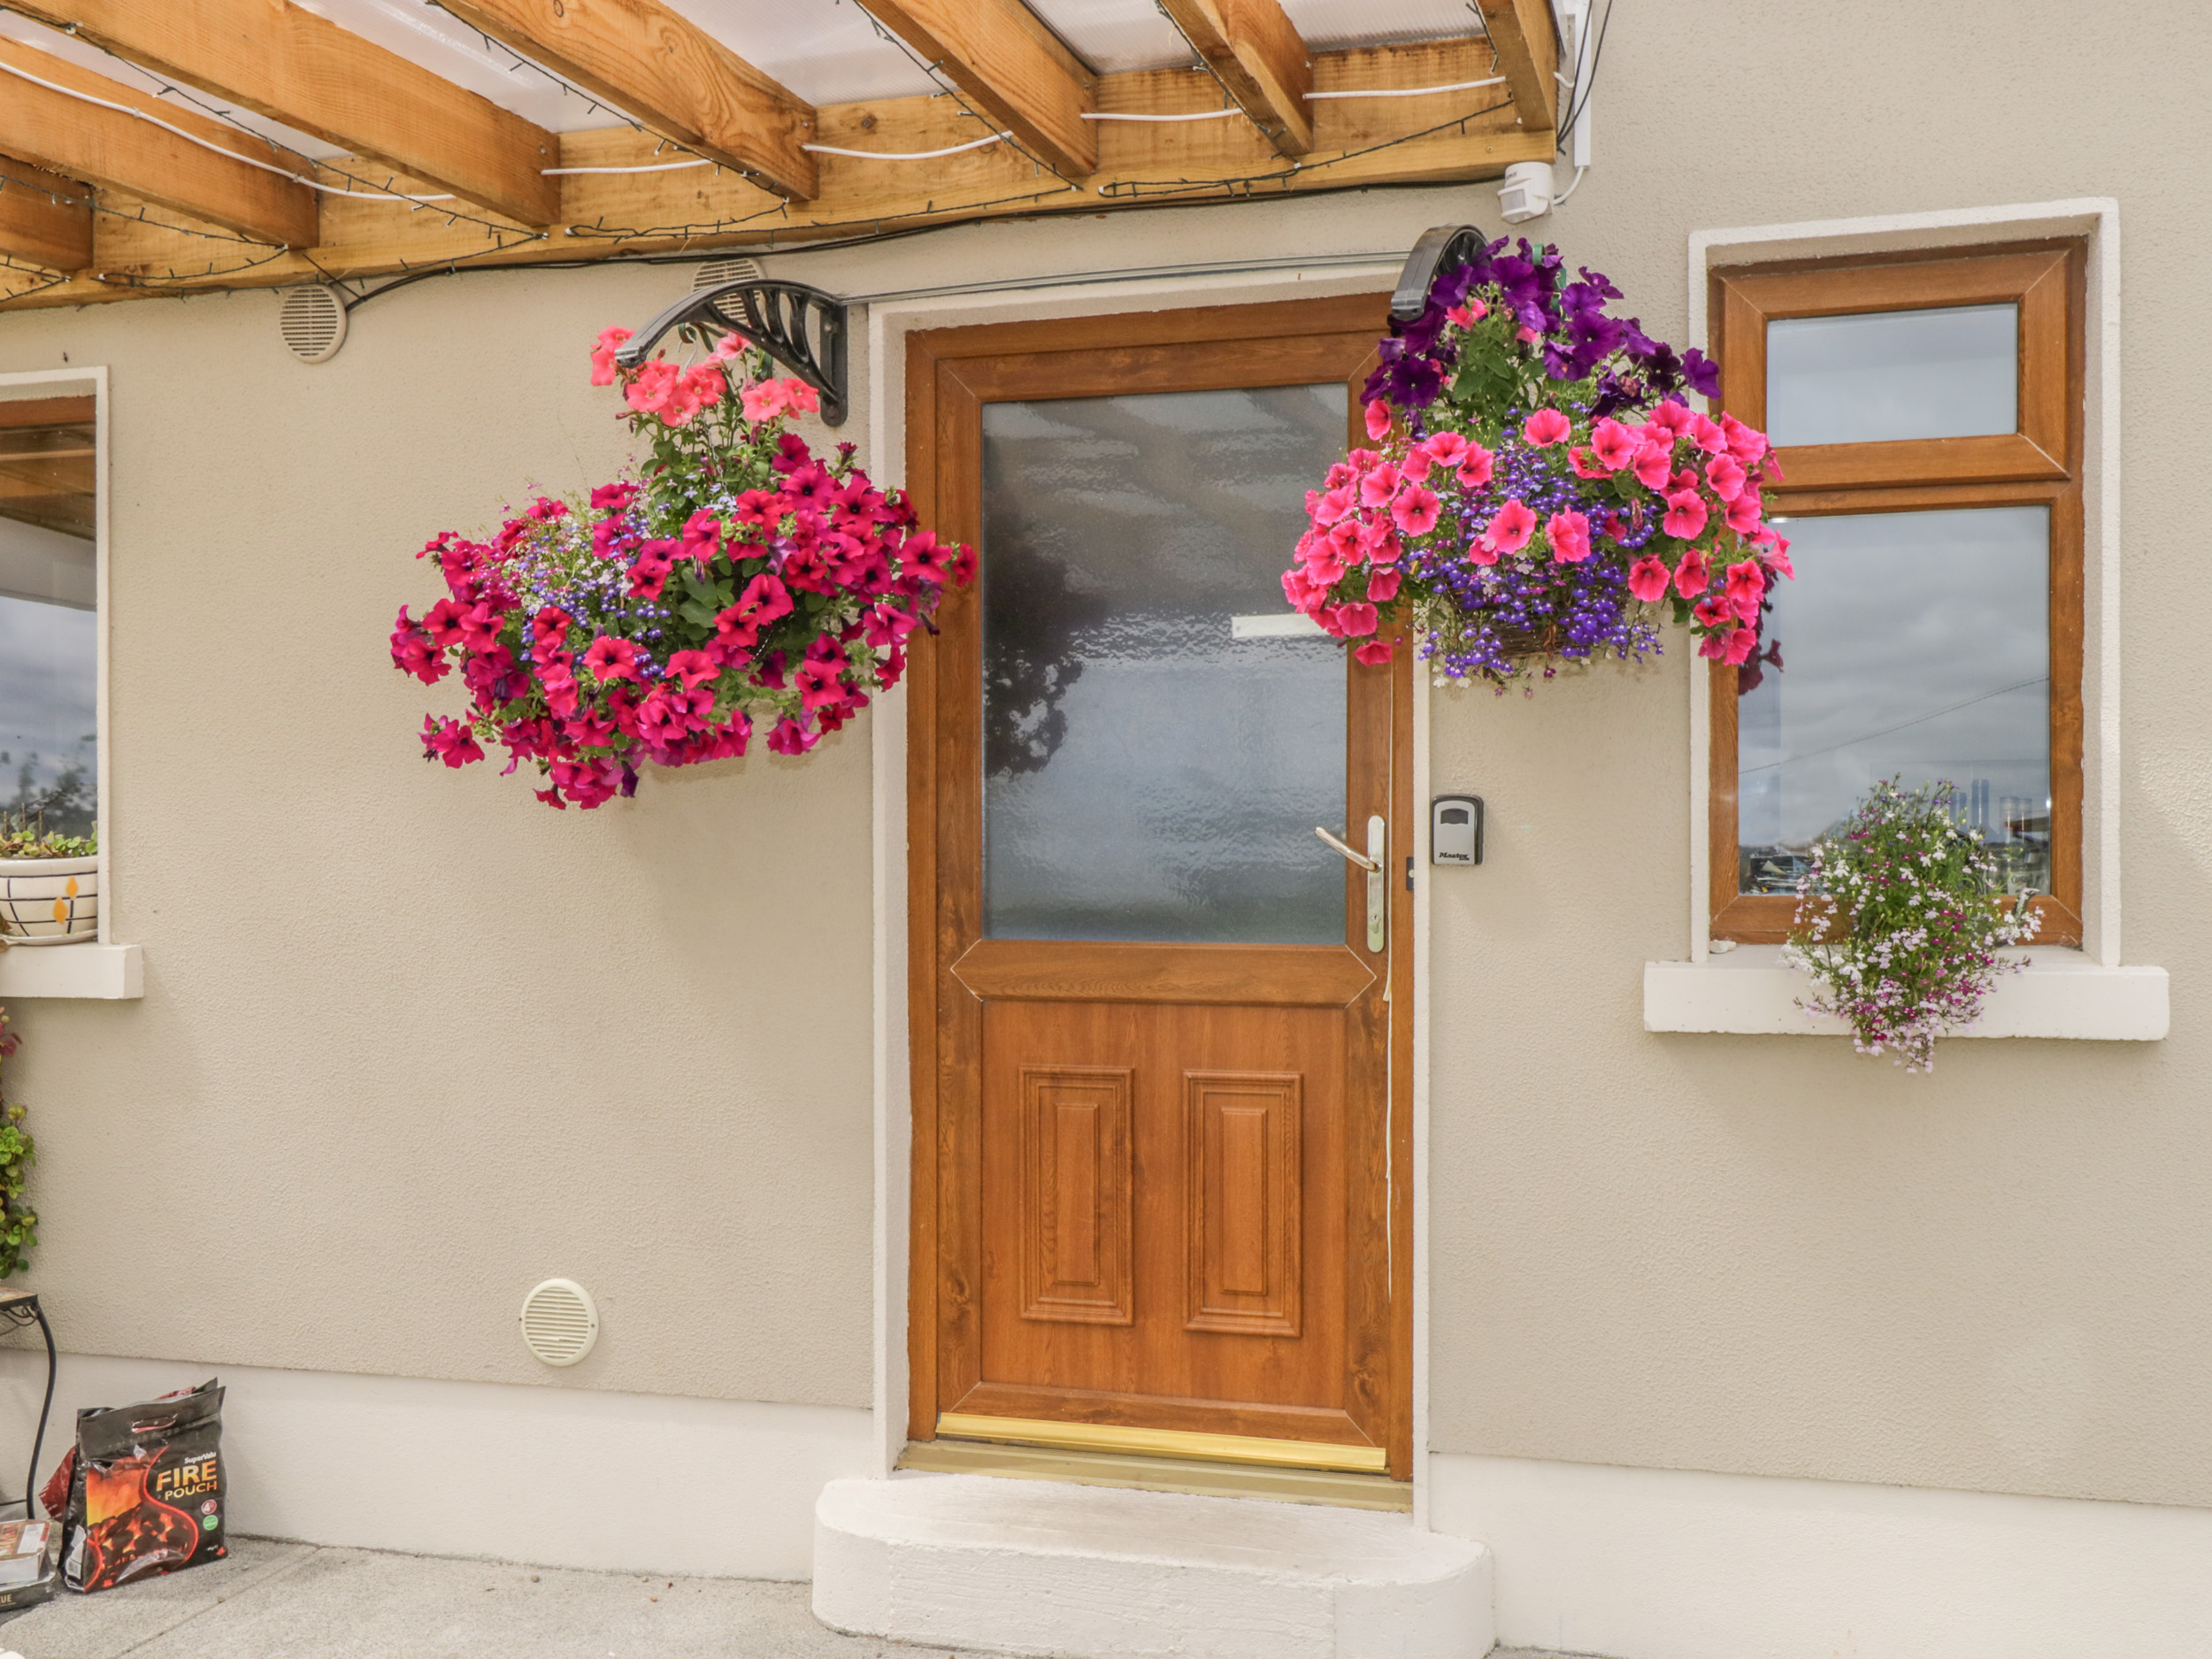 A Country View Cottage, Athenry, county galway